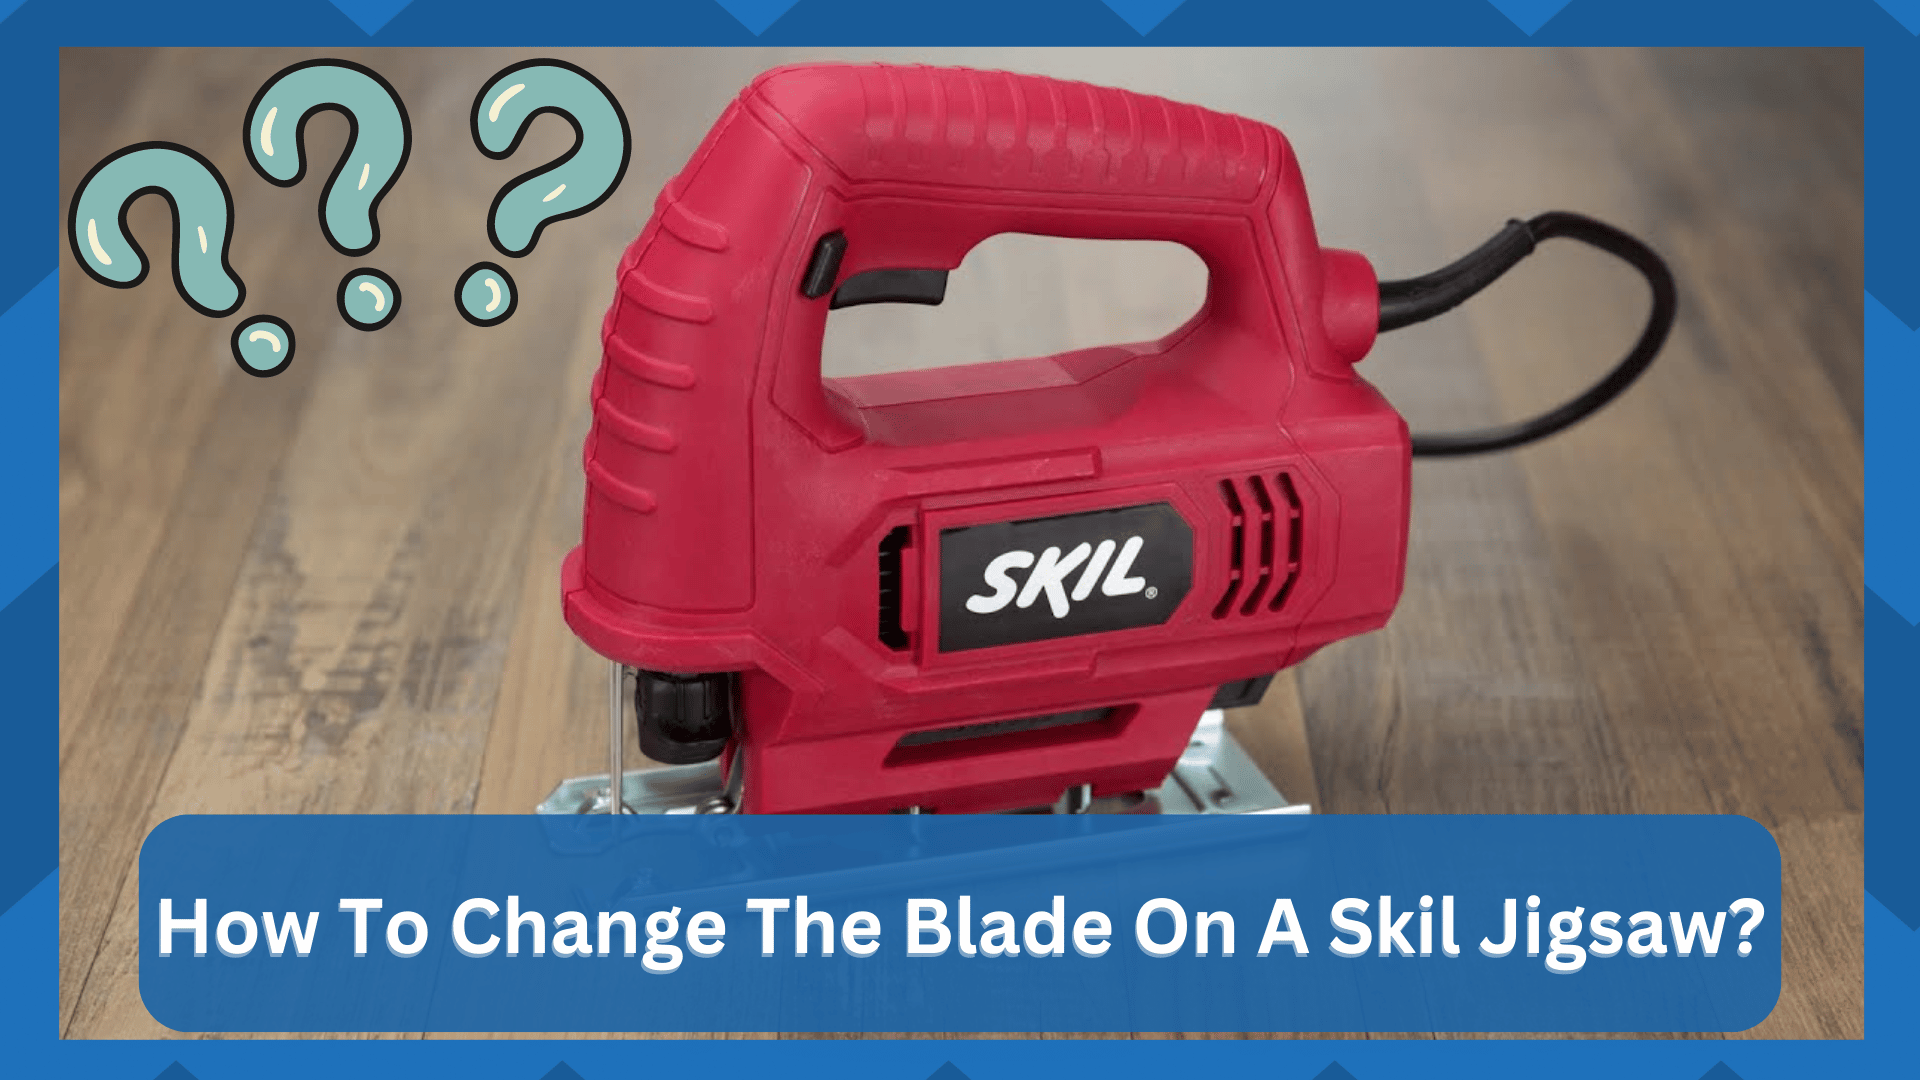 How To Change The Blade On A Skil Jigsaw